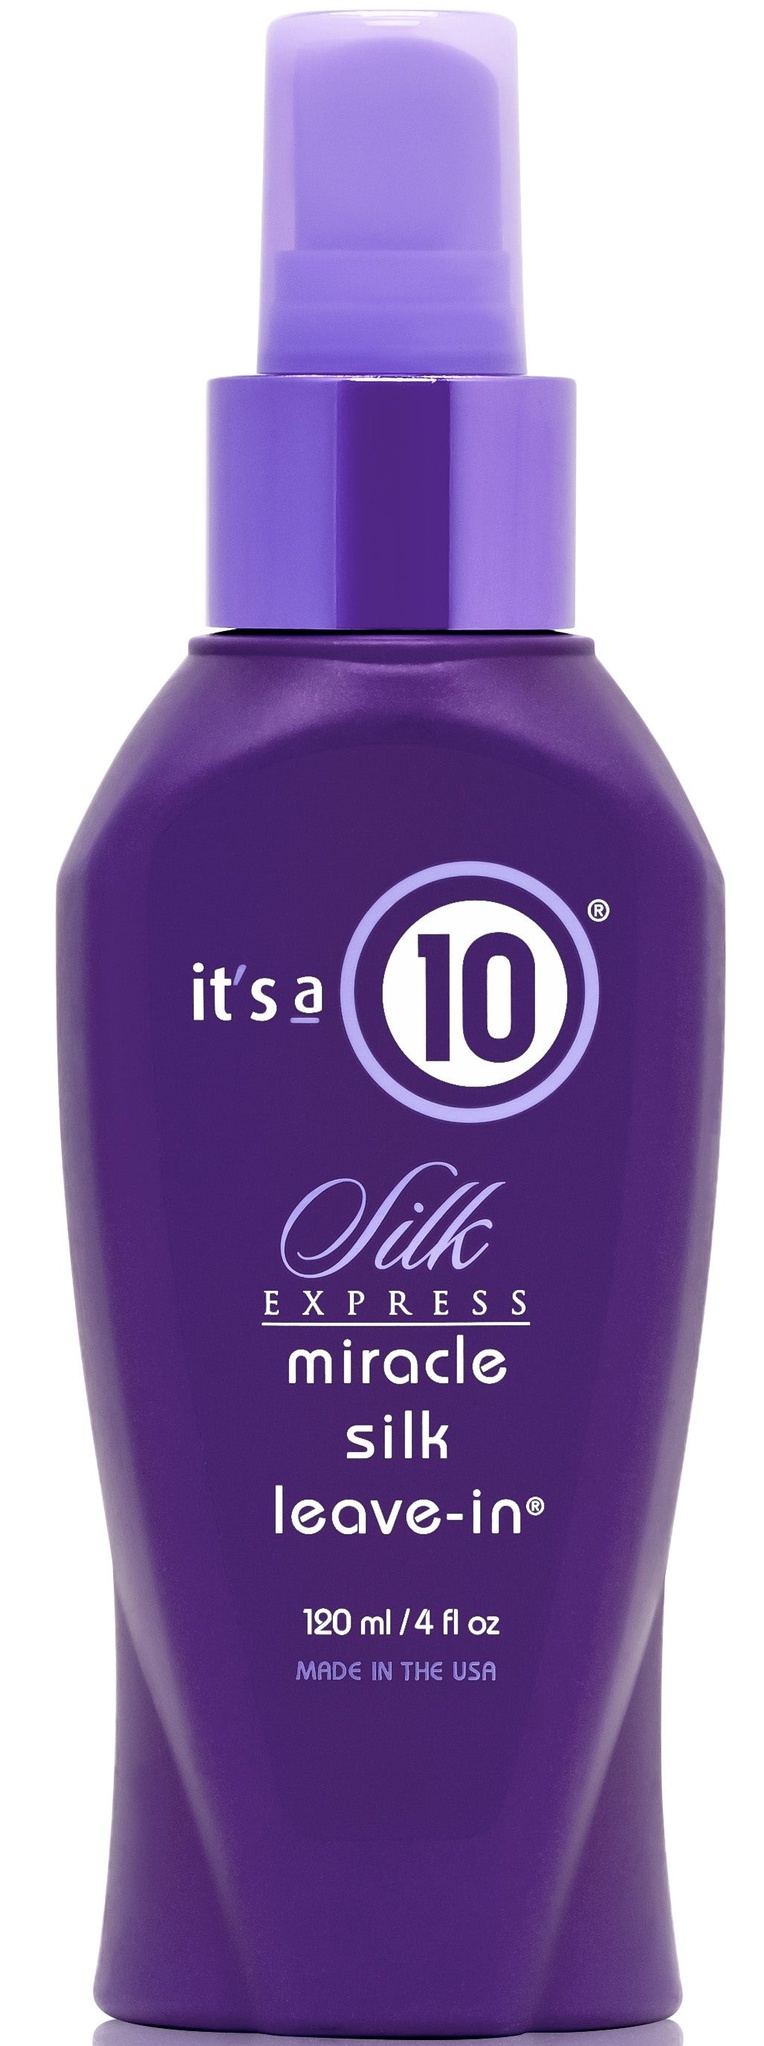 It's a 10 Silk Express Miracle Silk Leave-in Spray